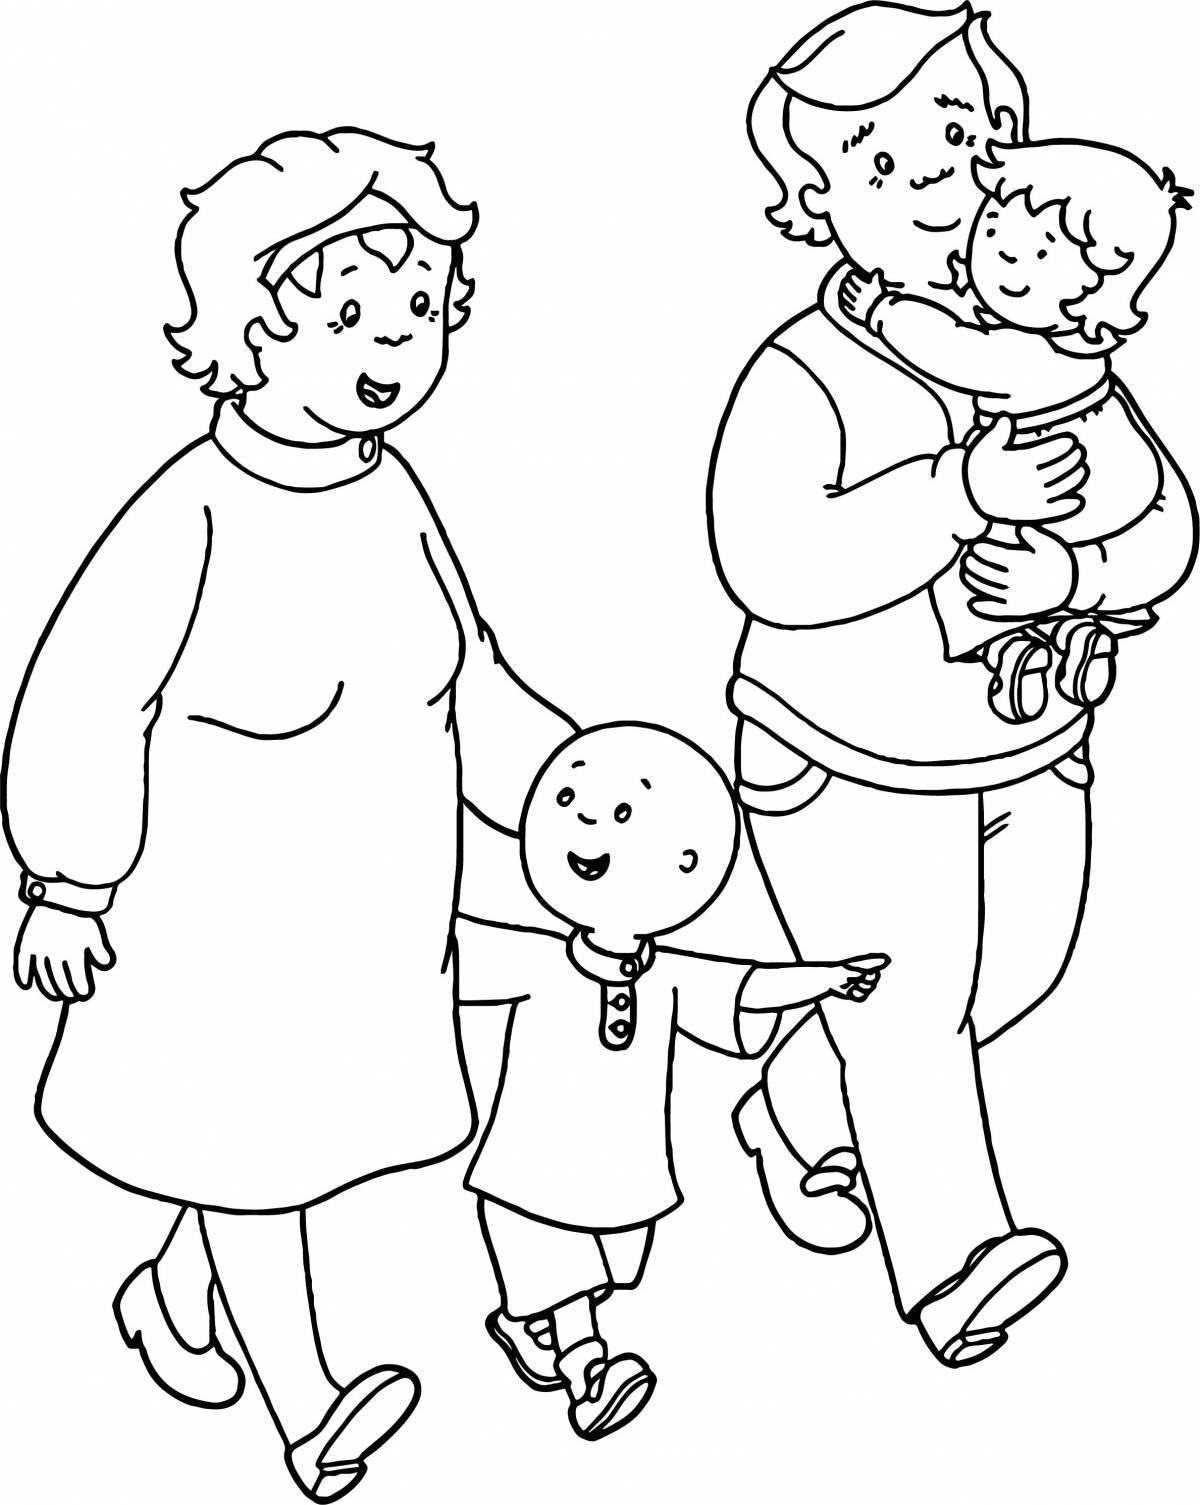 Radiant family coloring page